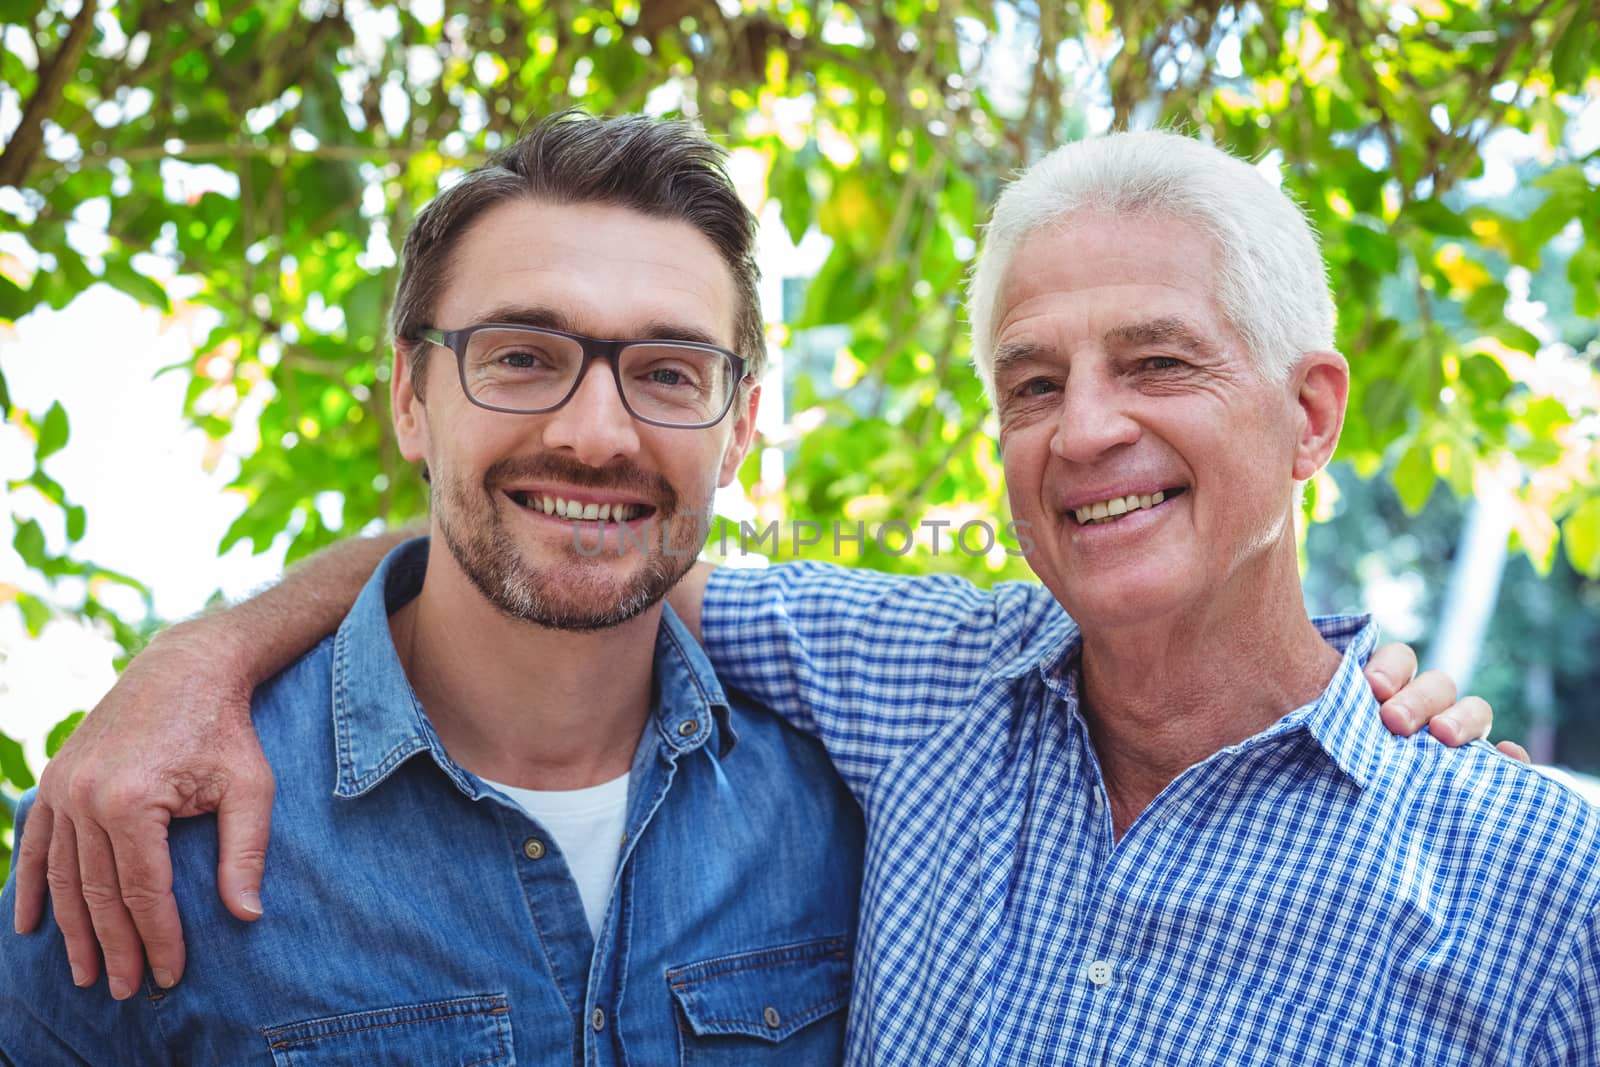 Portrait of happy father and son with arm around while standing outdoors